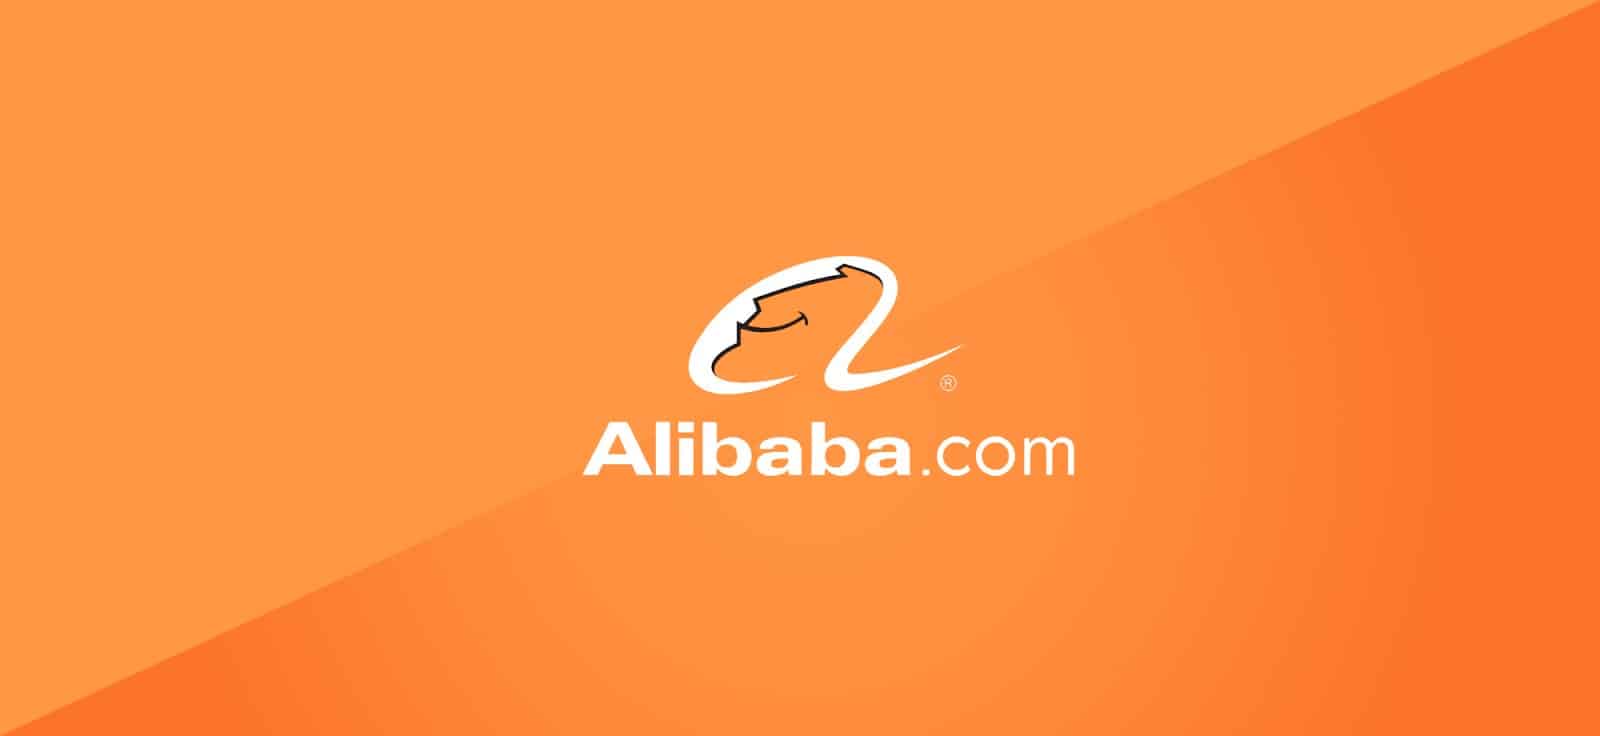 Image of Alibaba.com home page in an orange background.